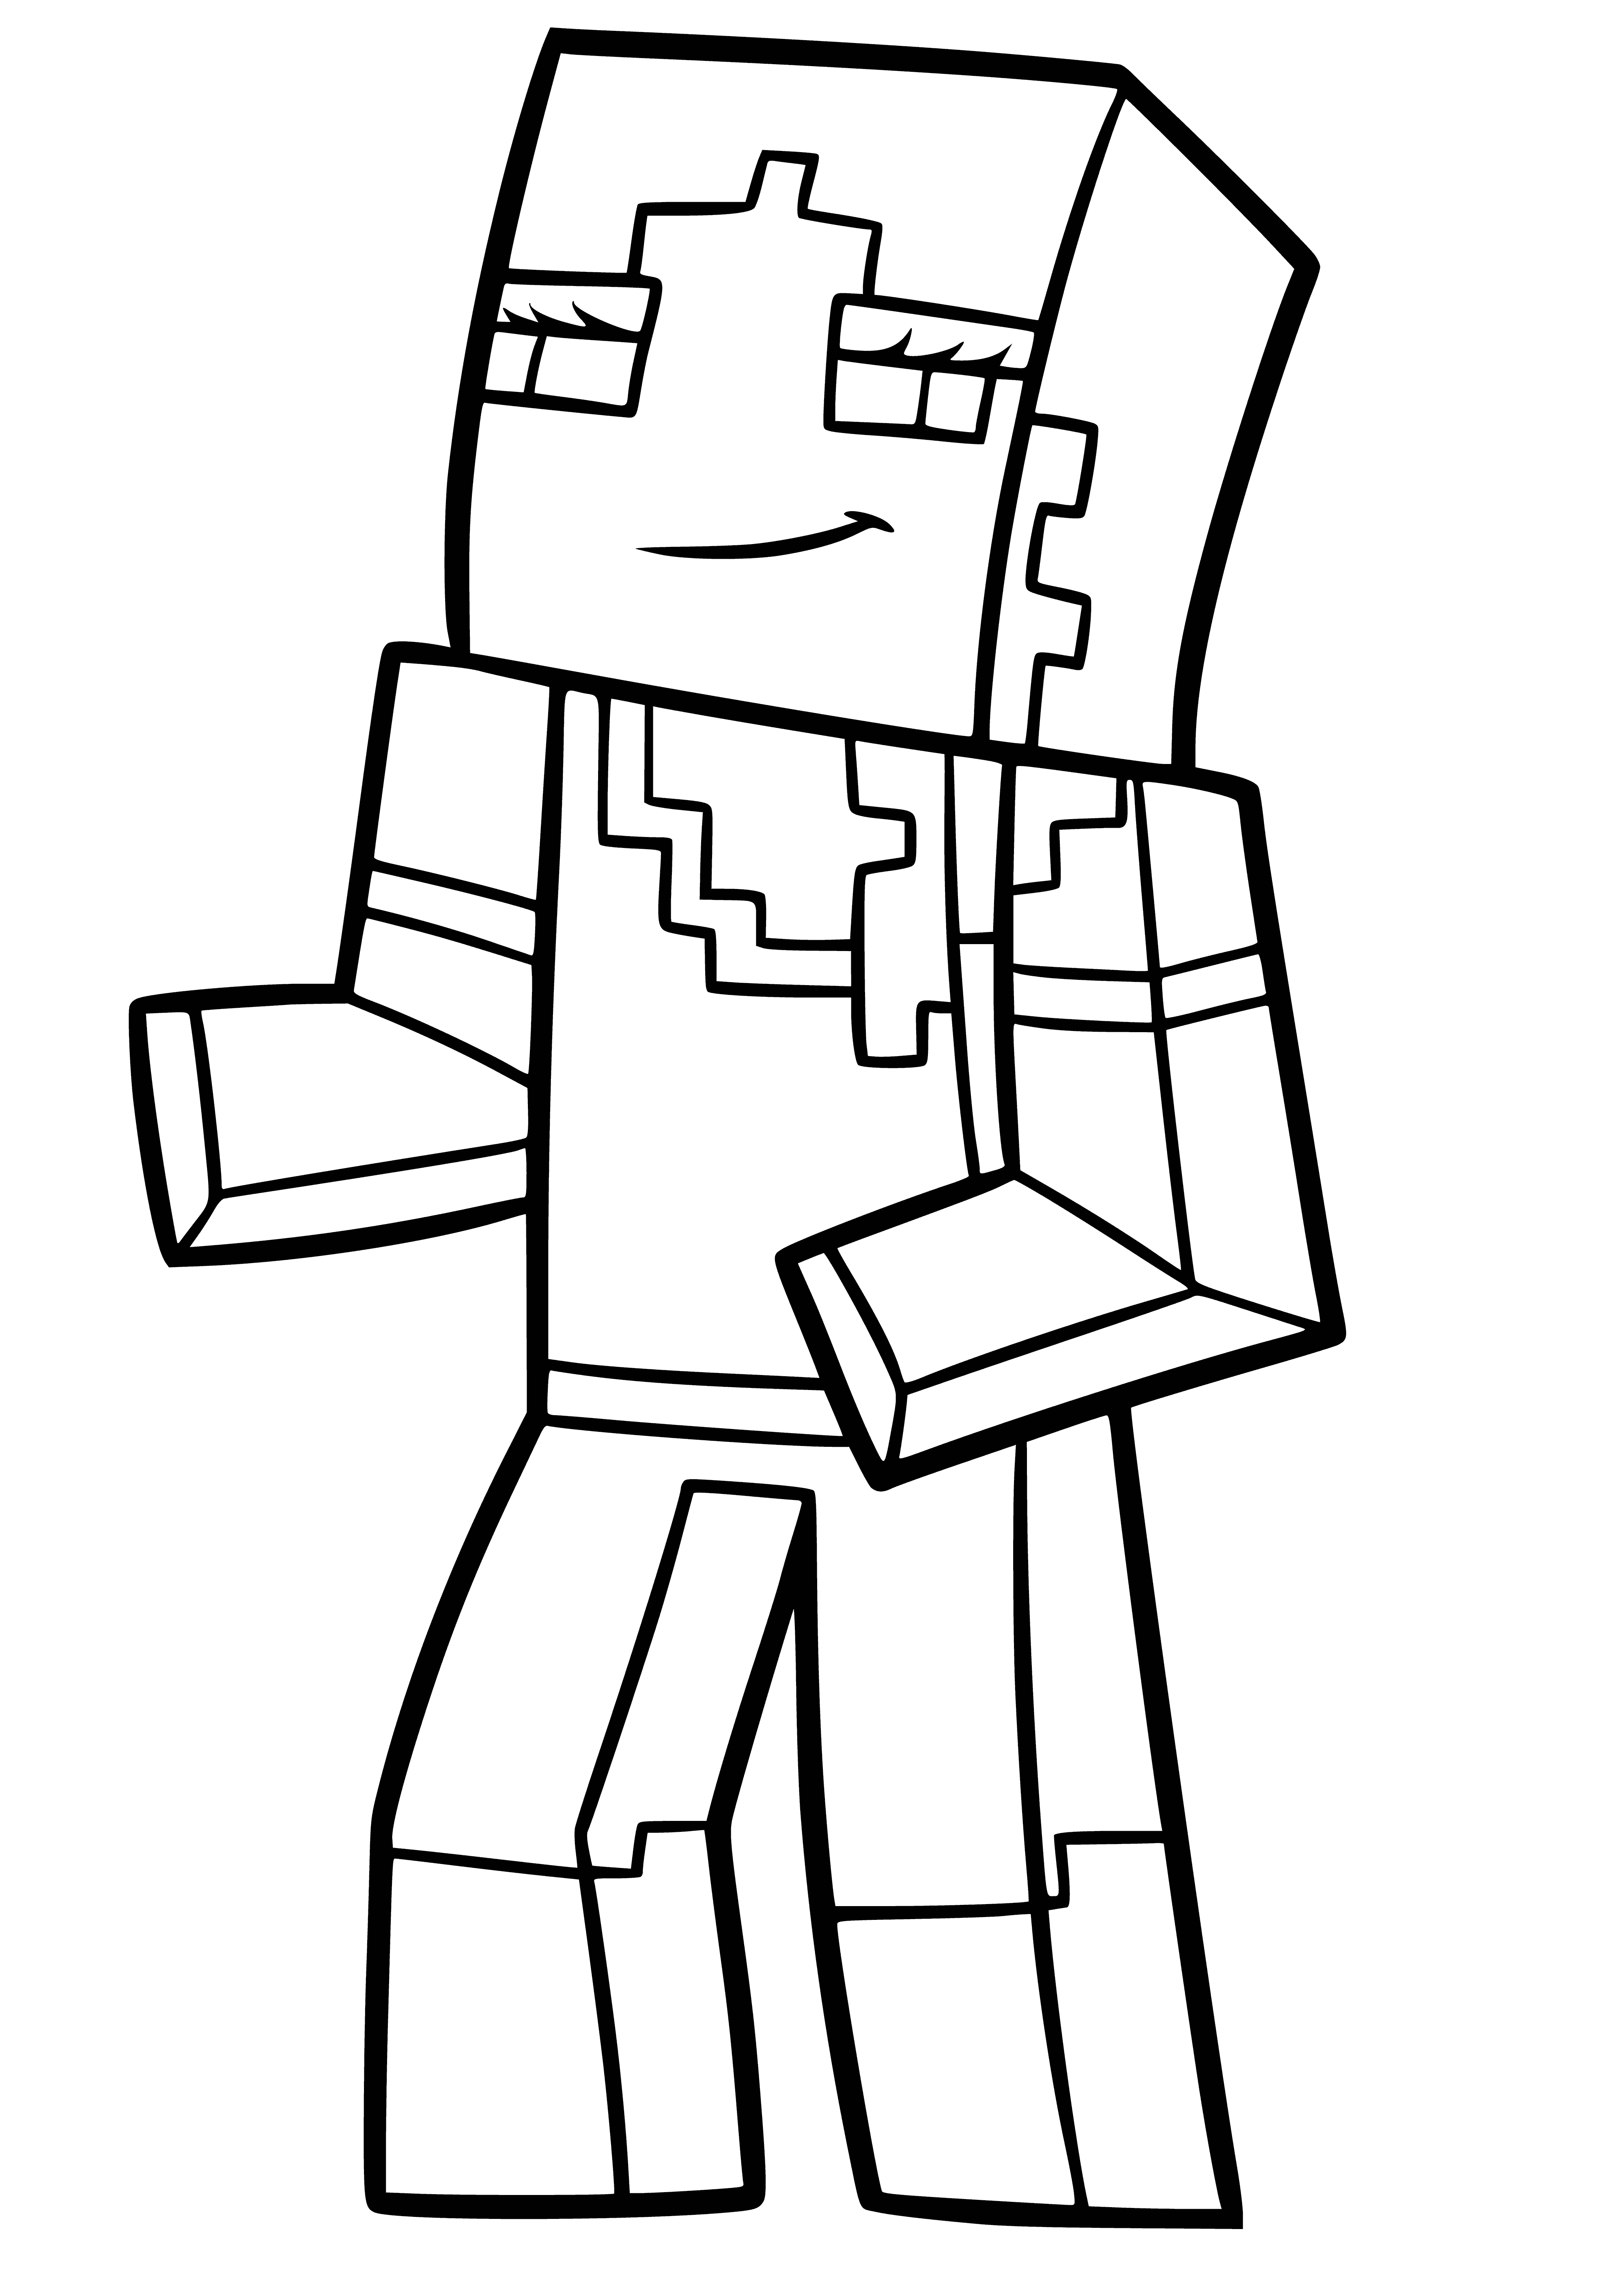 coloring page: Alex, a Minecraft character, dances in blue shirt and brown pants, happy on a block of dirt surrounded by green grass. #Minecraft